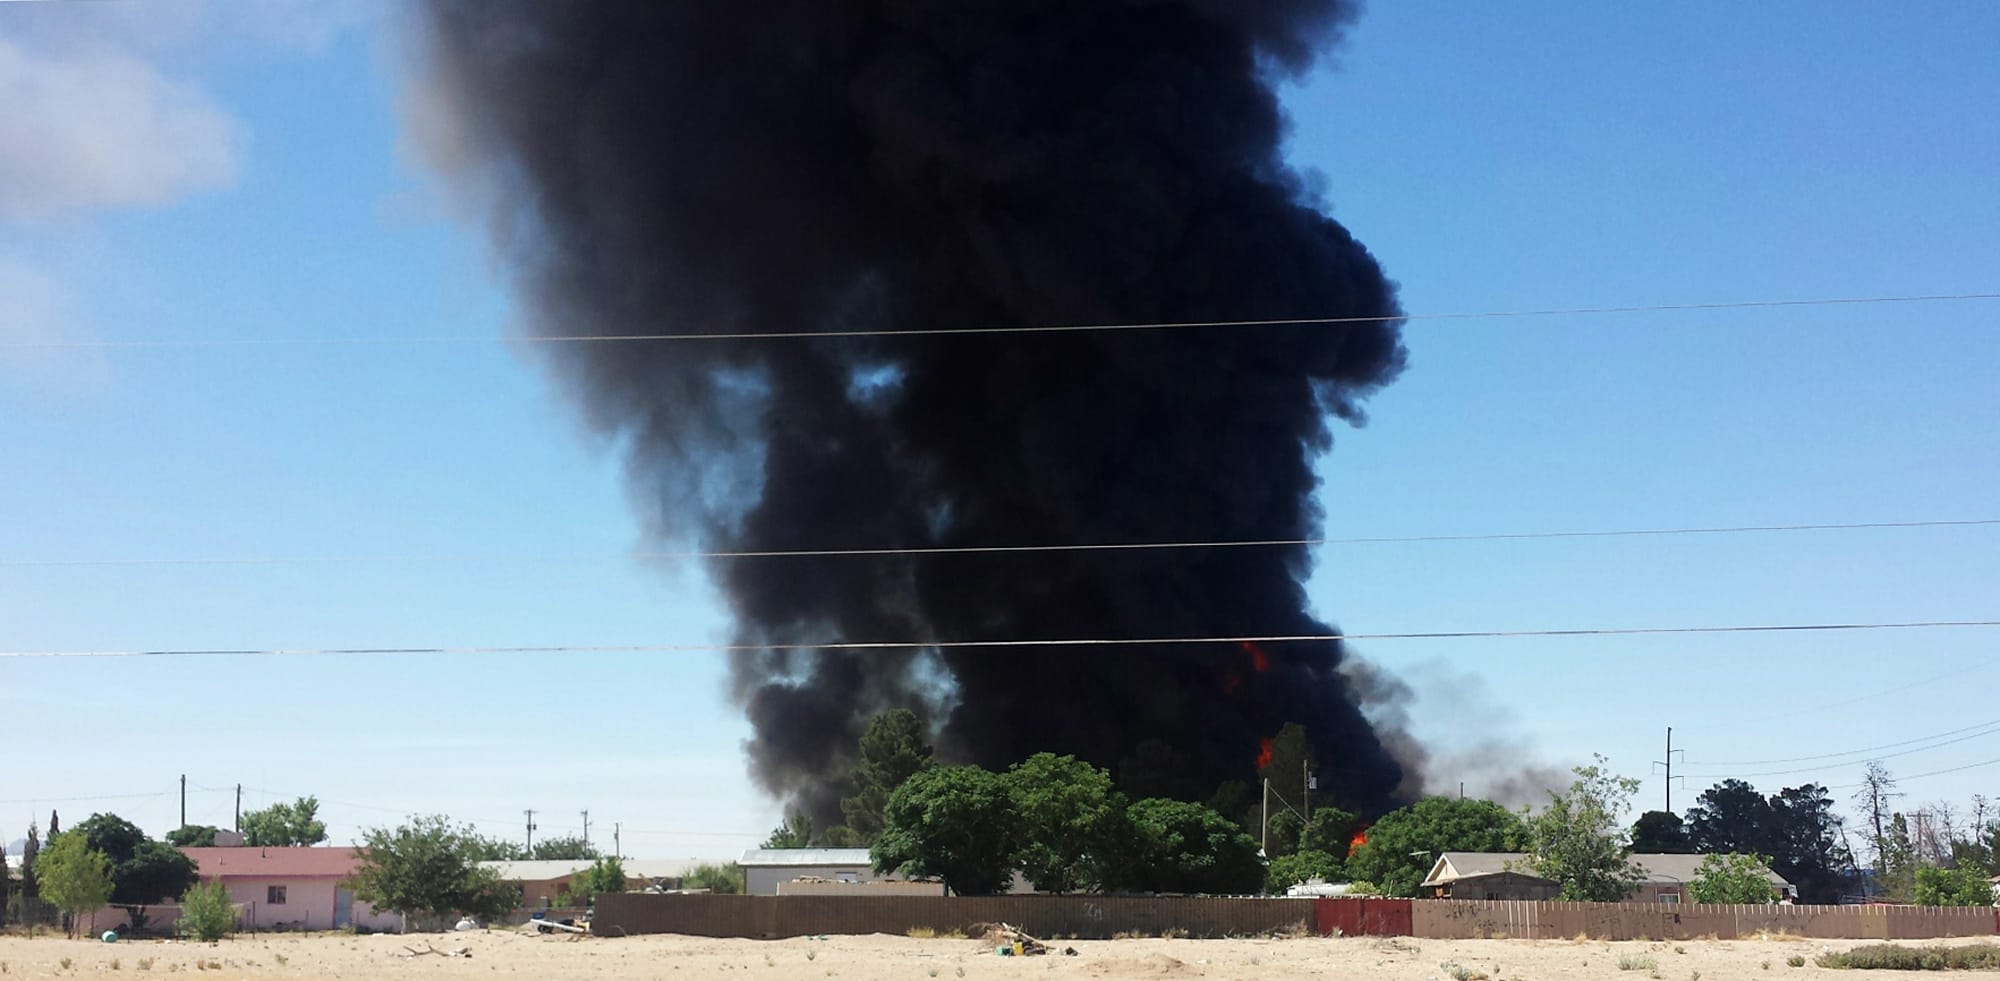 Smoke rises from a fire at a biofuel facility near Anthony, N.M., on Tuesday.